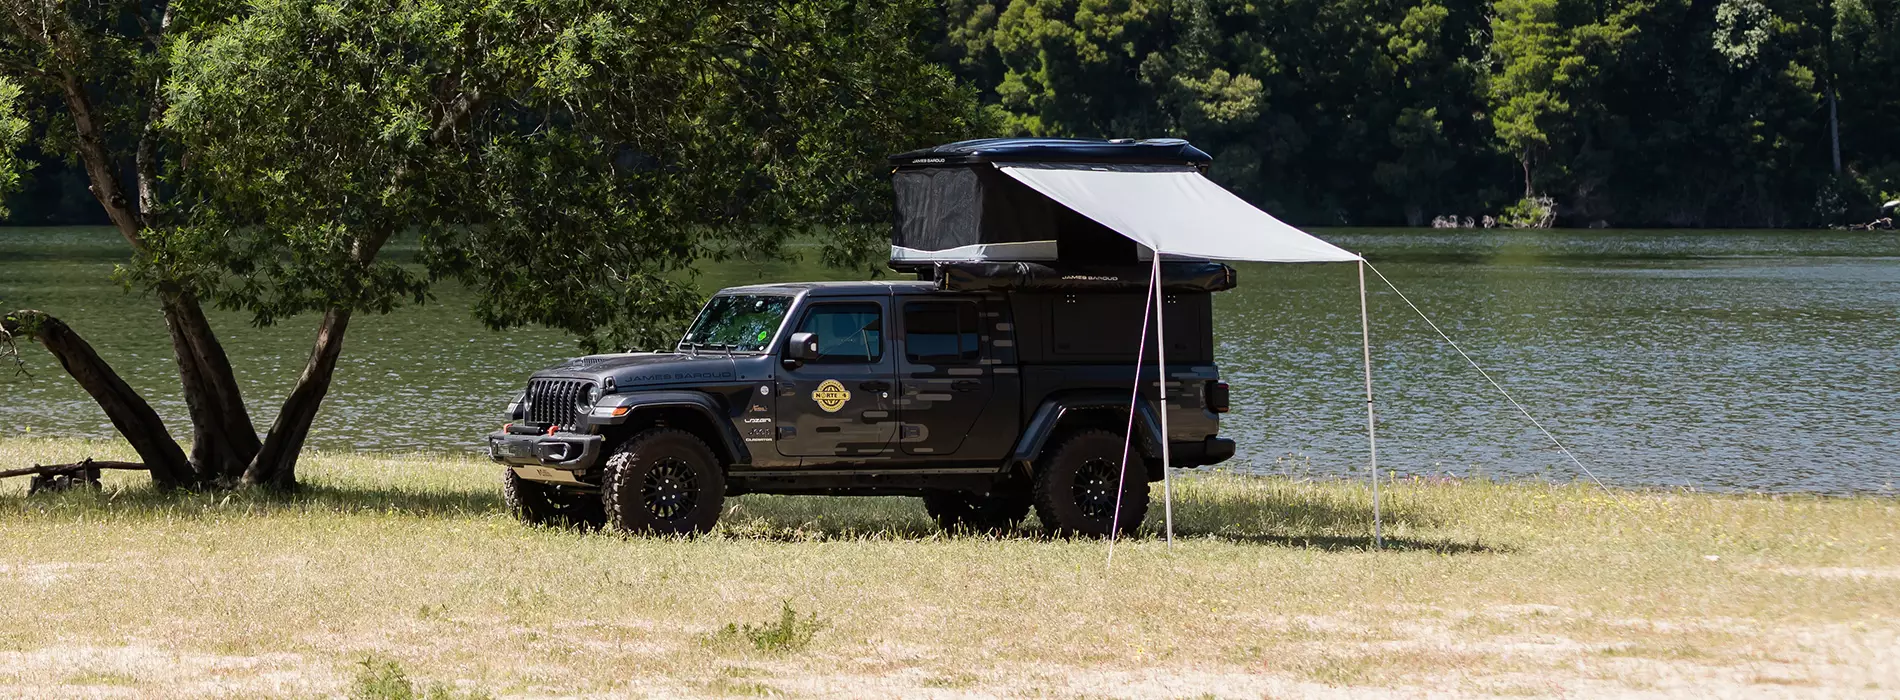 James Baroud Frontier Awning Being Used On a Jeep Banner